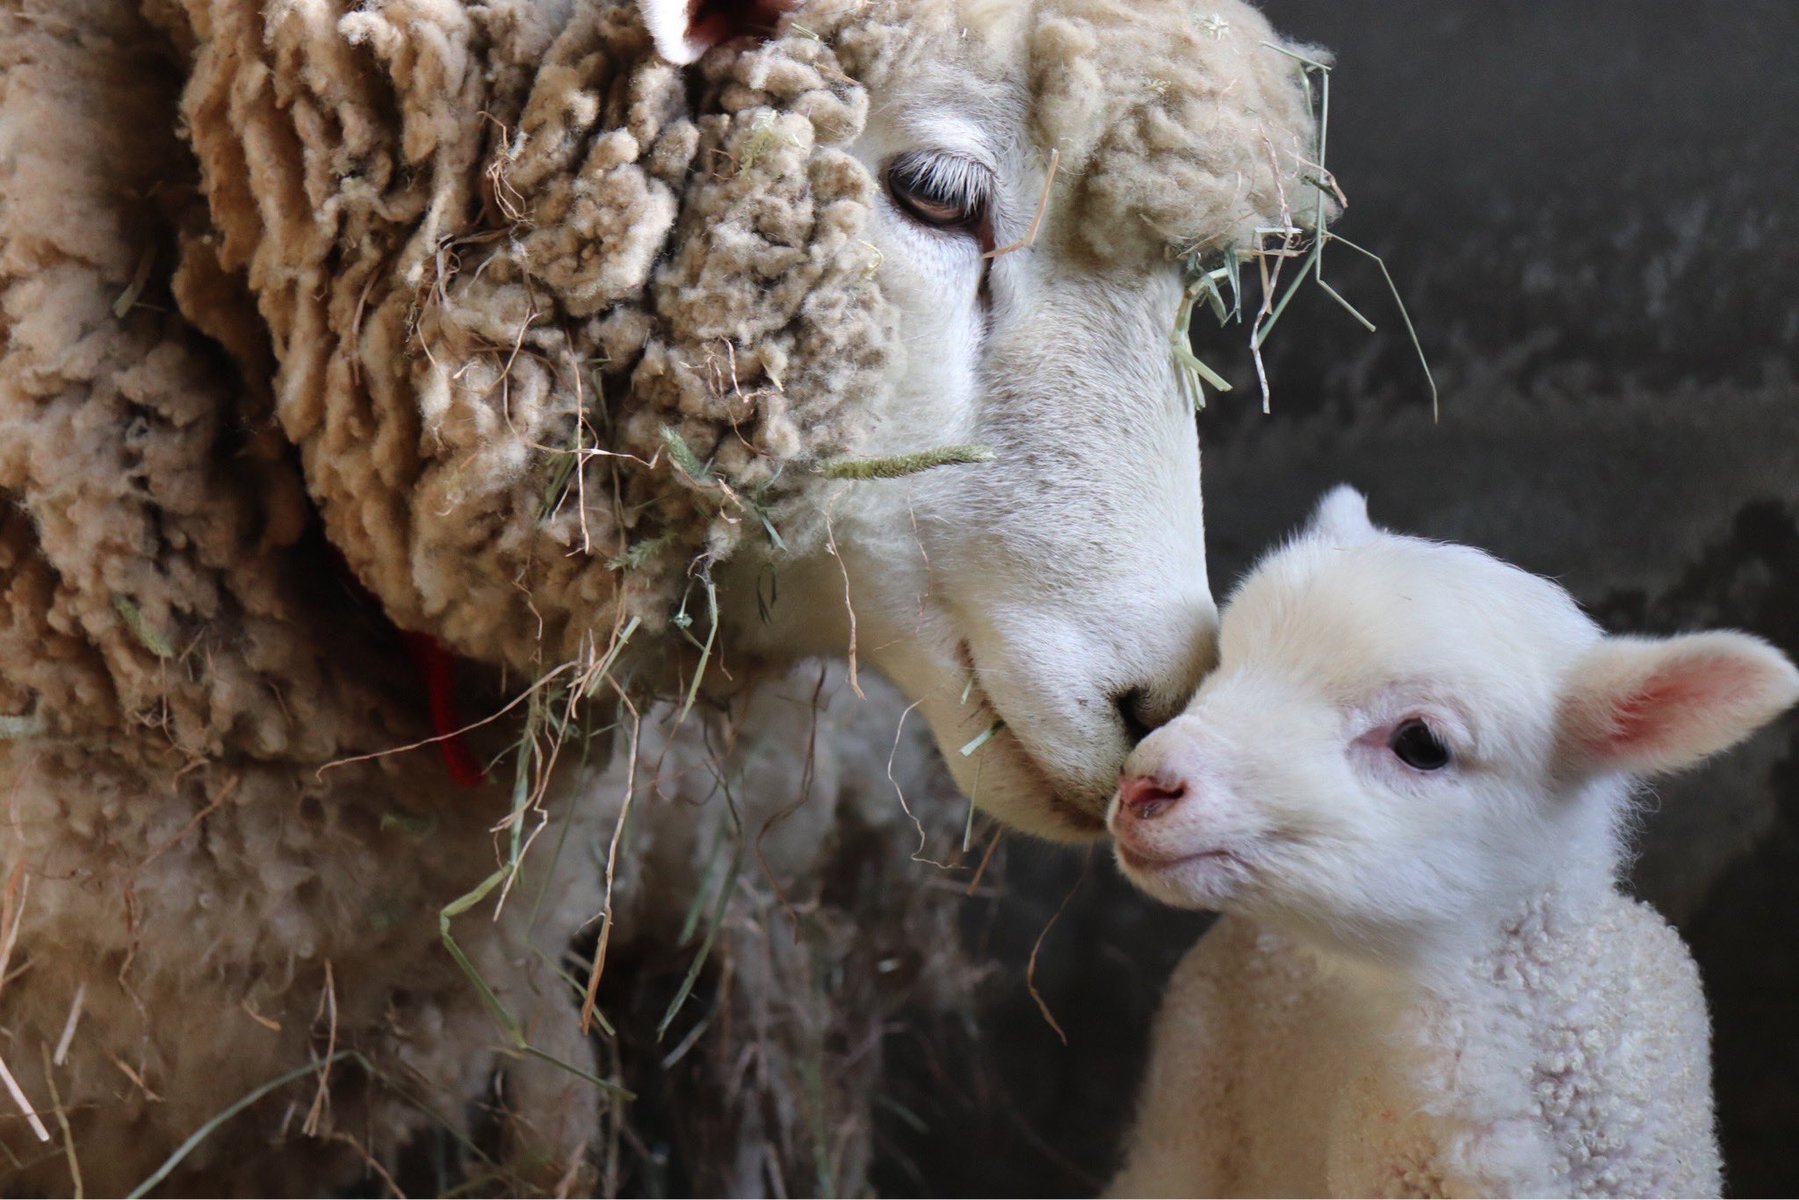 A mother sheep nuzzles its baby